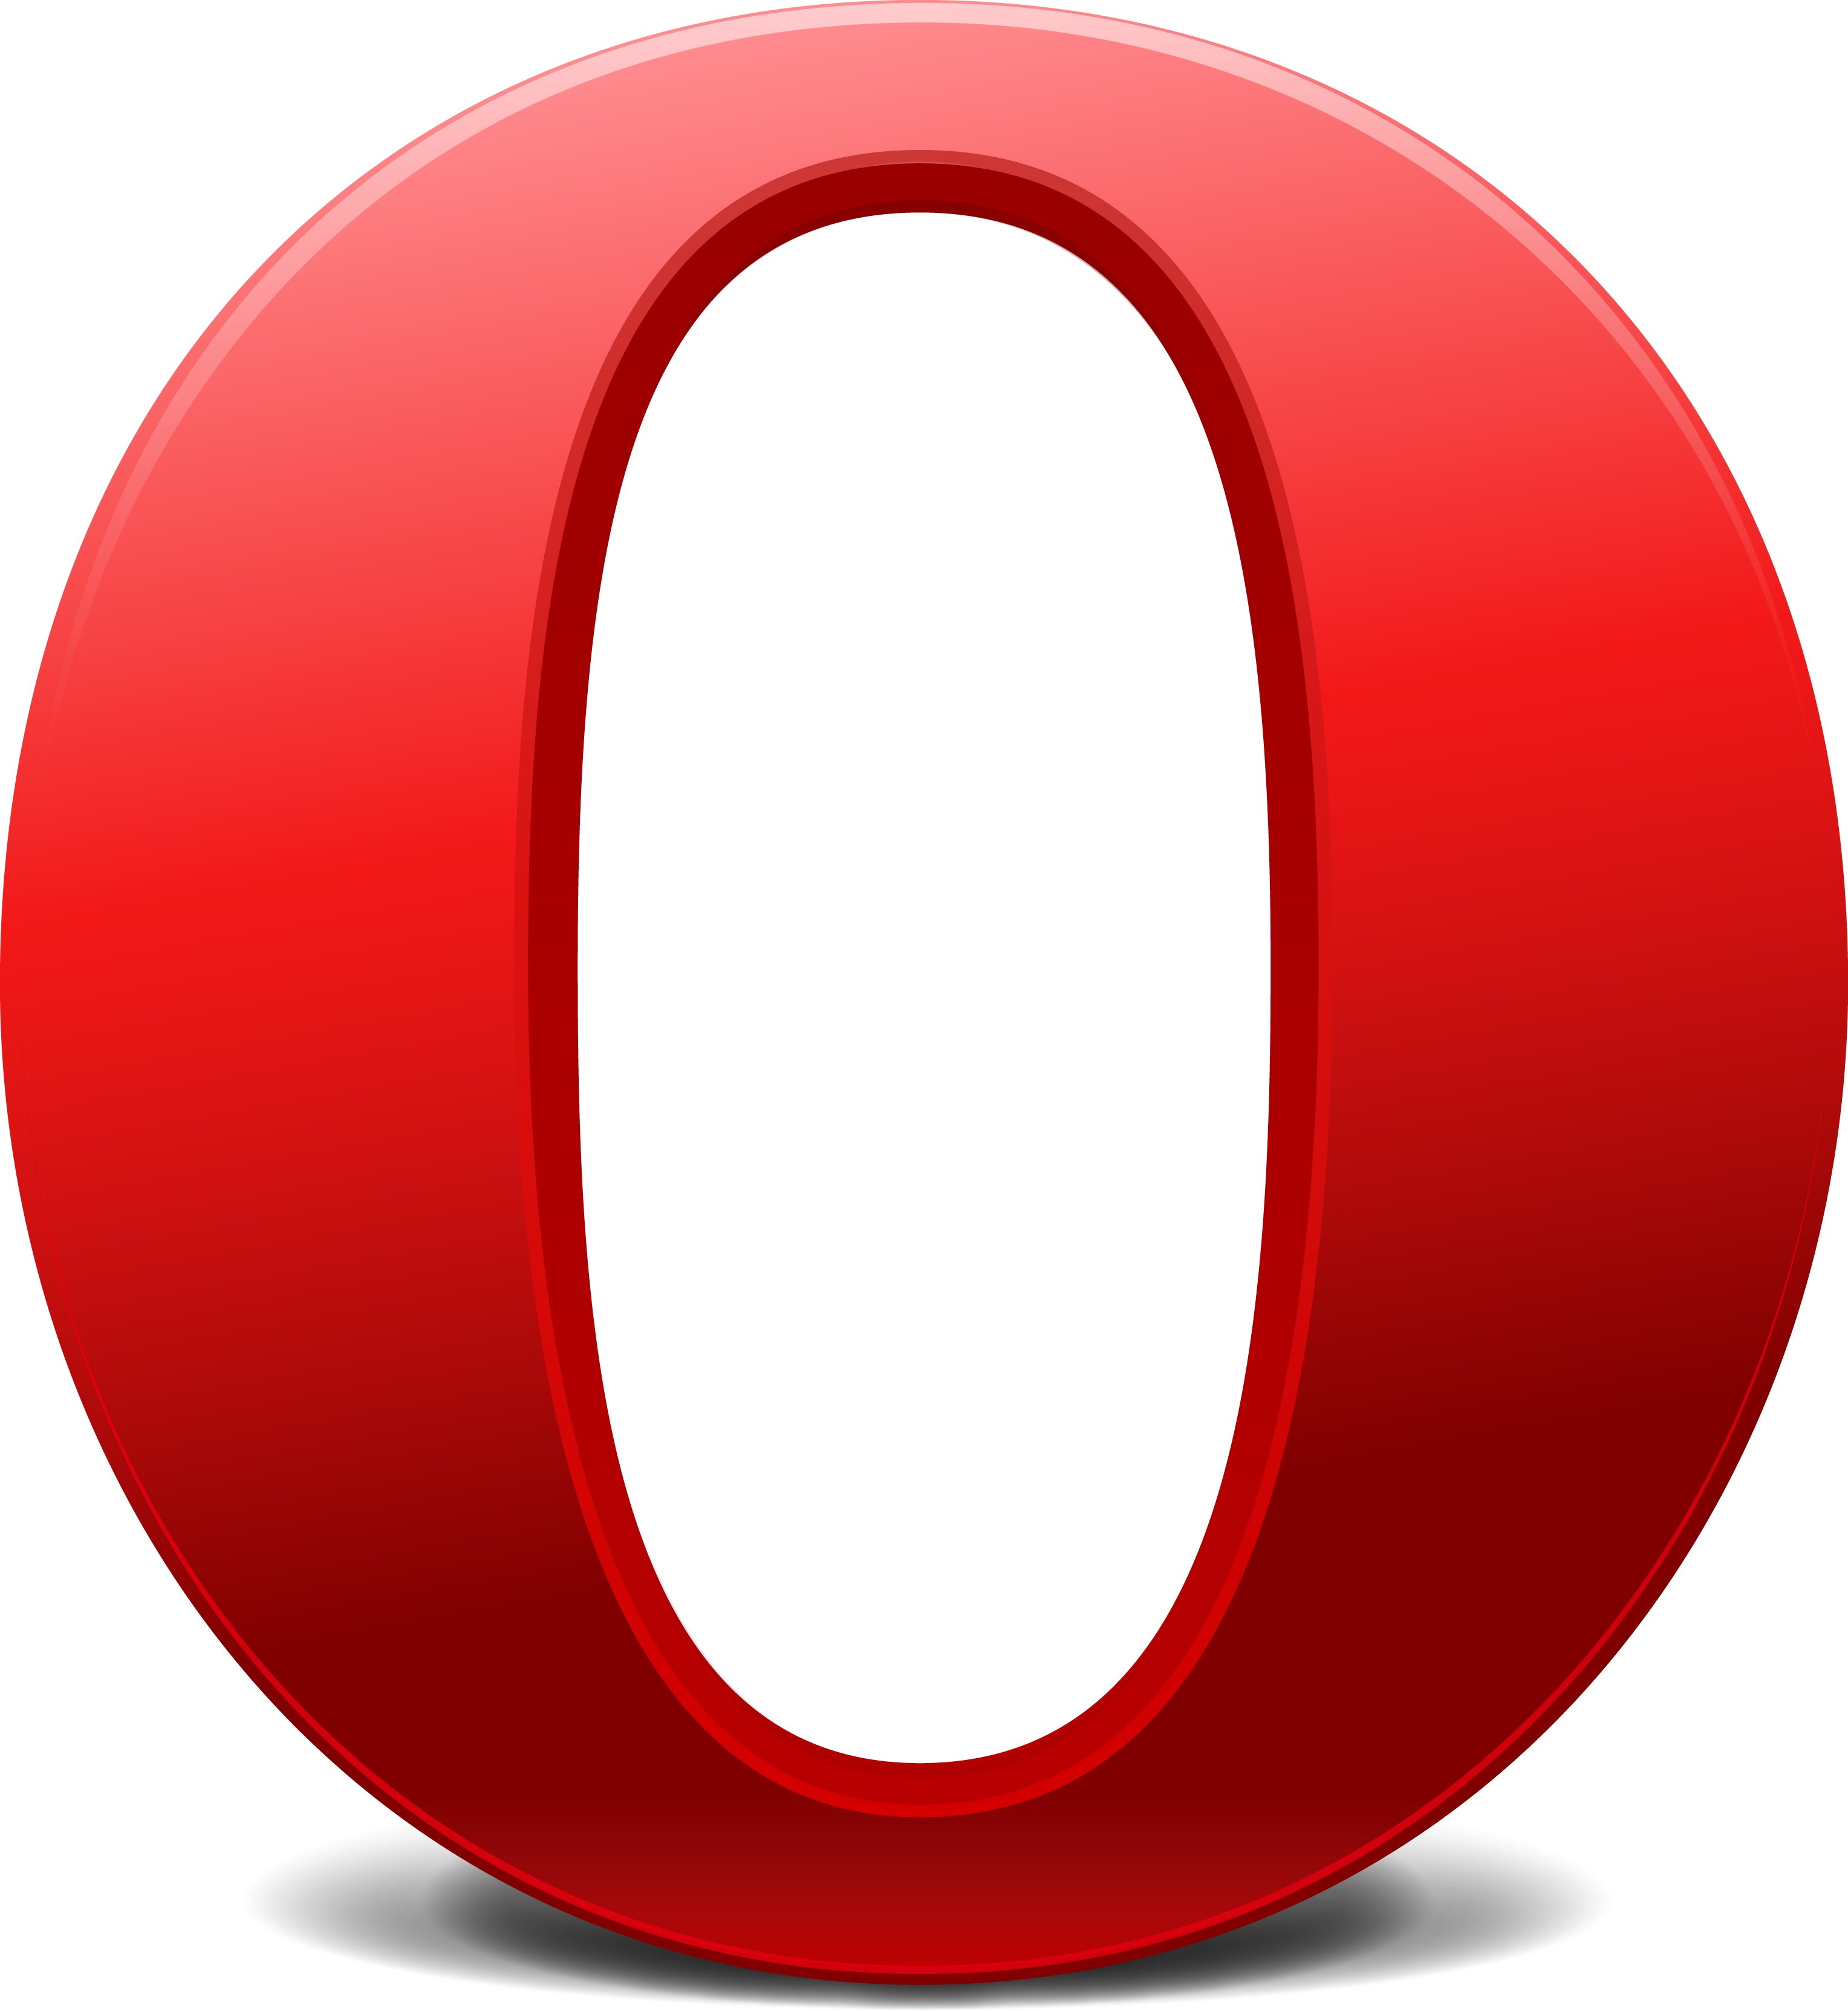 10 Opera Browser Icon Boost Images